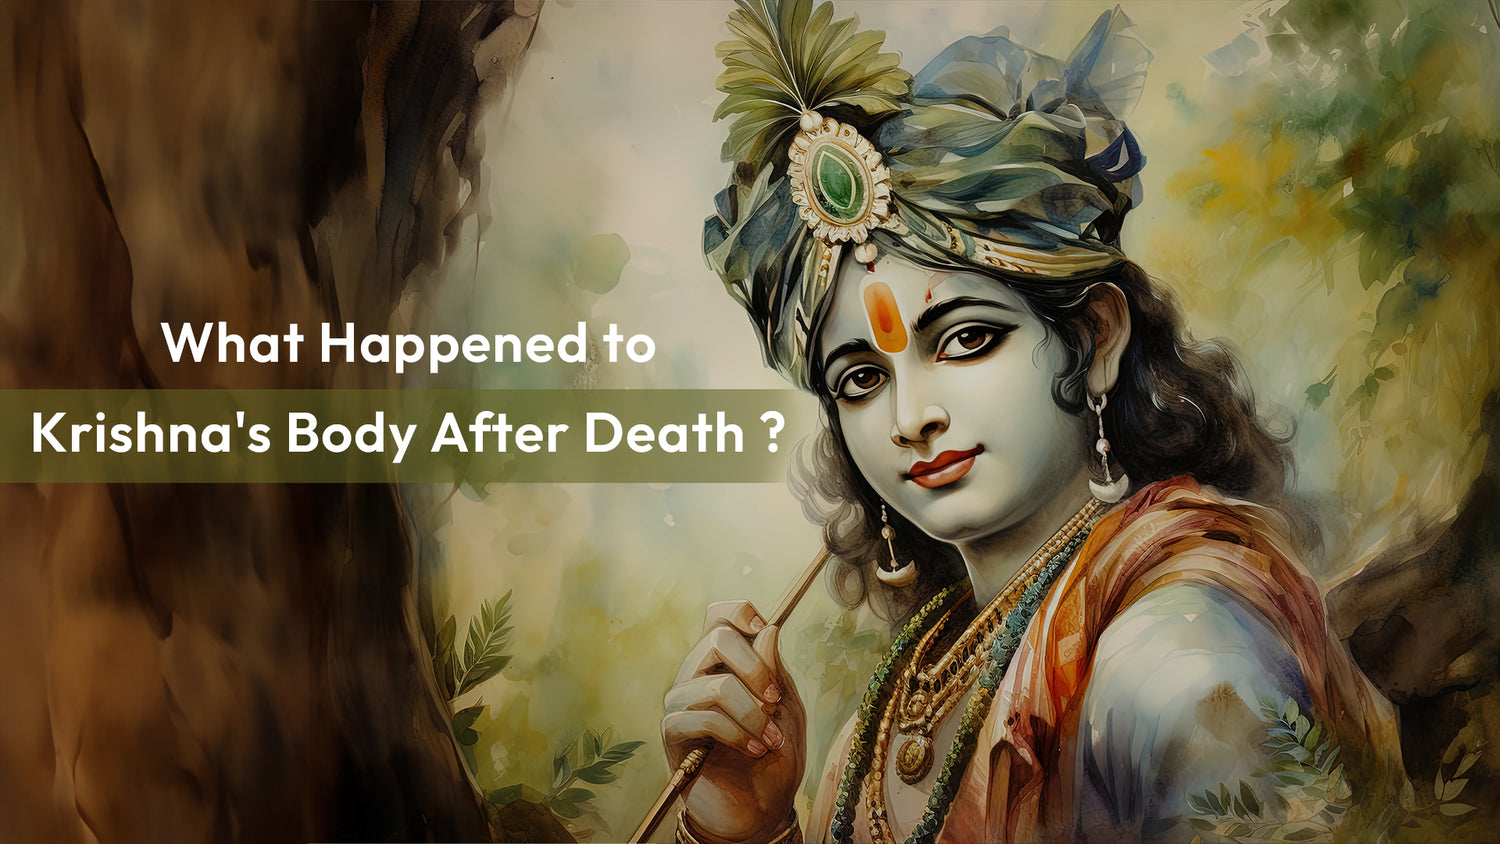 What happened to Krishna's body after death